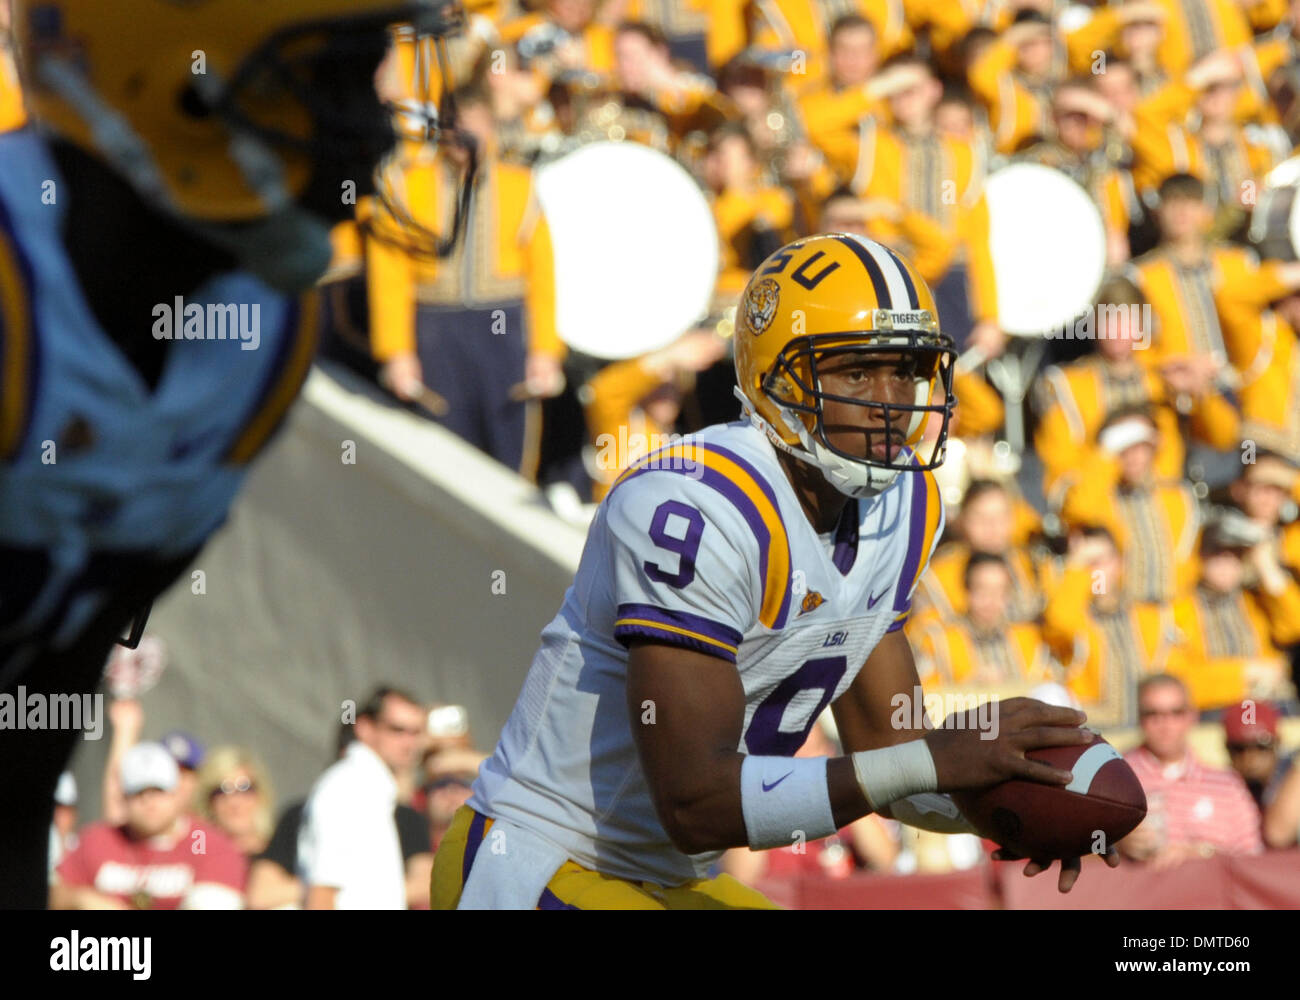 LSU quarterback, #9 Jordan Jefferson, takes the snap during an SEC West matchup between #3 Alabama and #9 LSU.  The game is being held in Bryant .Denny Stadium in Tuscaloosa, Alabama.  Alabama would win the game 24-15. (Credit Image: © Stacy Revere/Southcreek Global/ZUMApress.com) Stock Photo